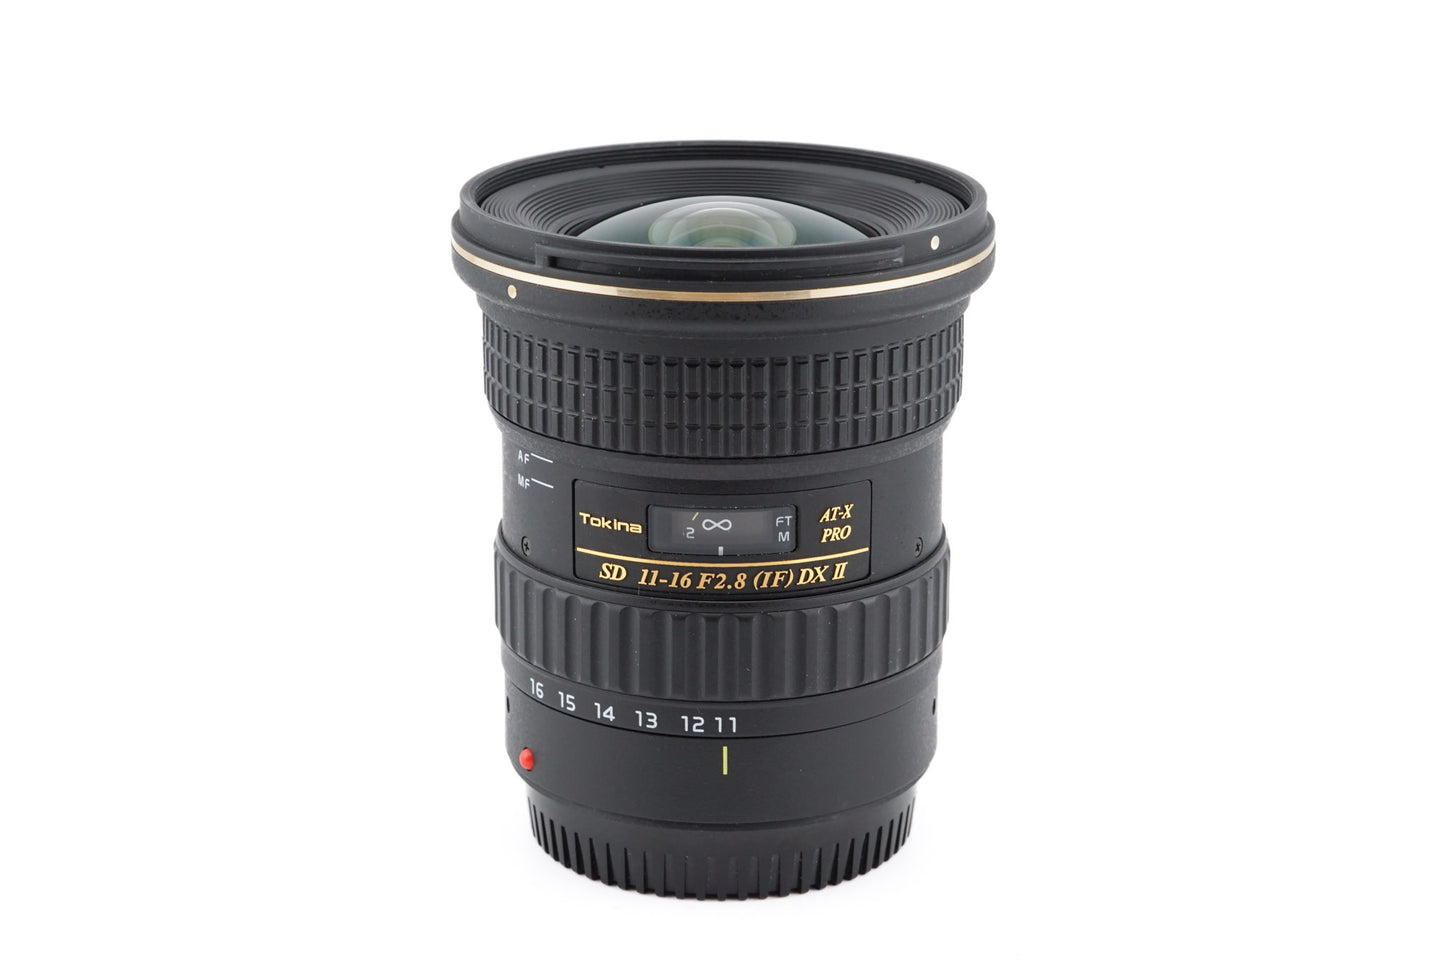 Tokina 11-16mm F2.8 AT-X Pro SD IF DX II Aspherical - Lens